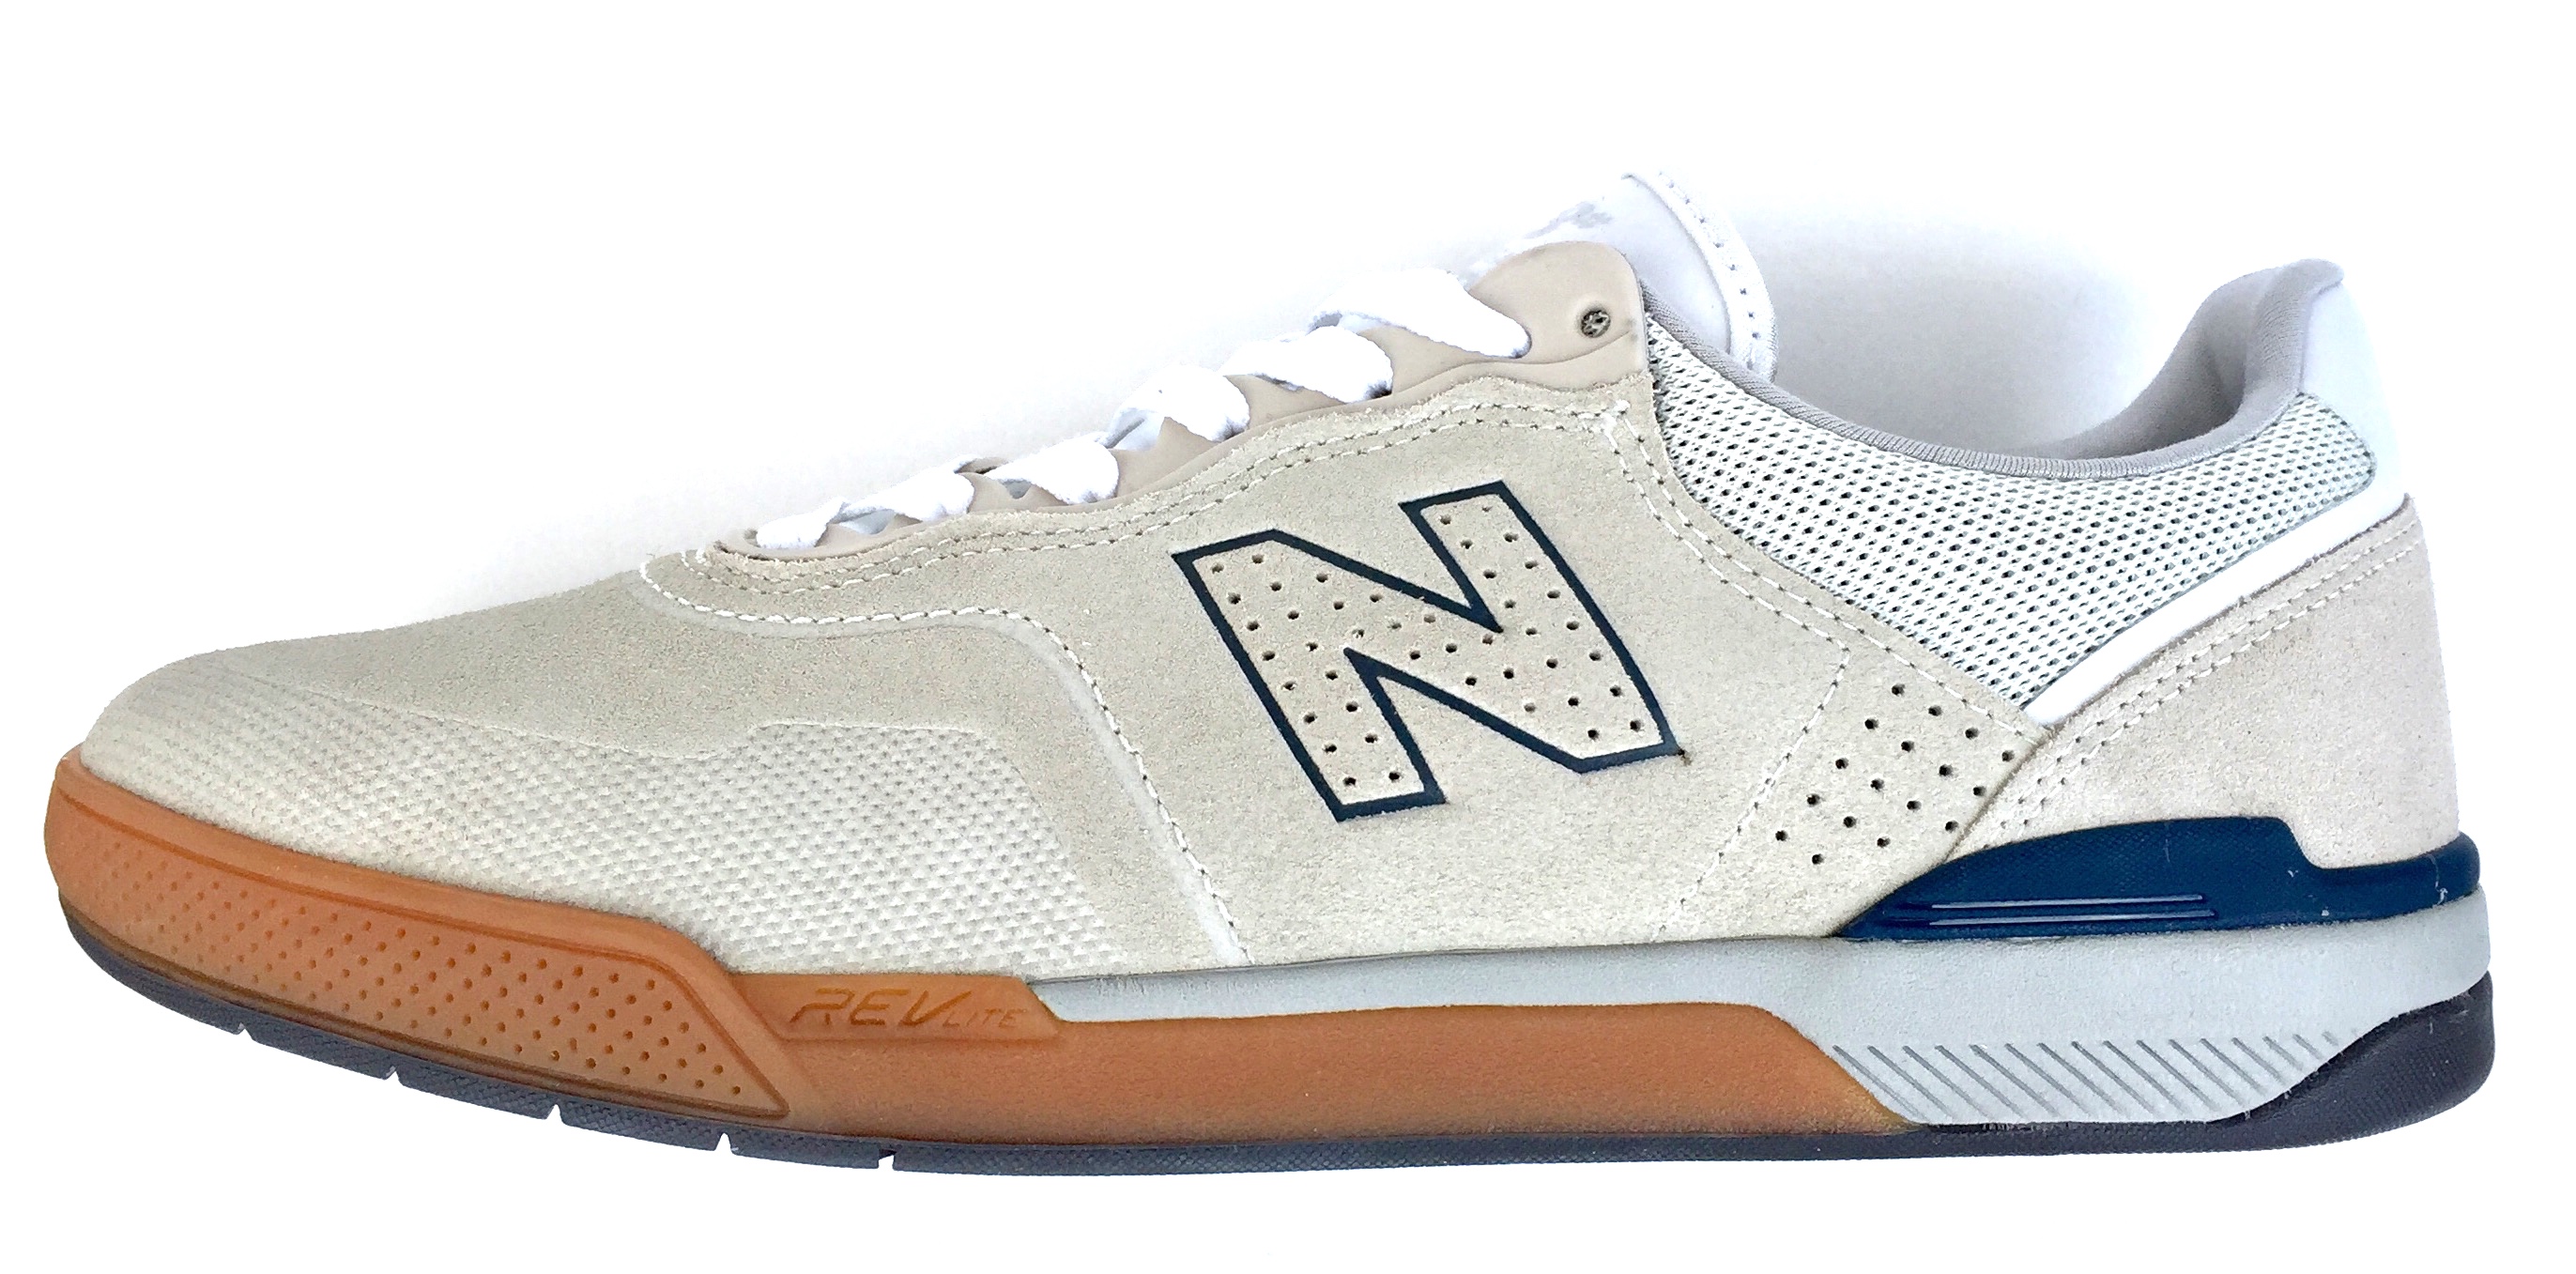 Cambiable Bonito profundo NB# Westagte 913 - Weartested - detailed skate shoe reviews